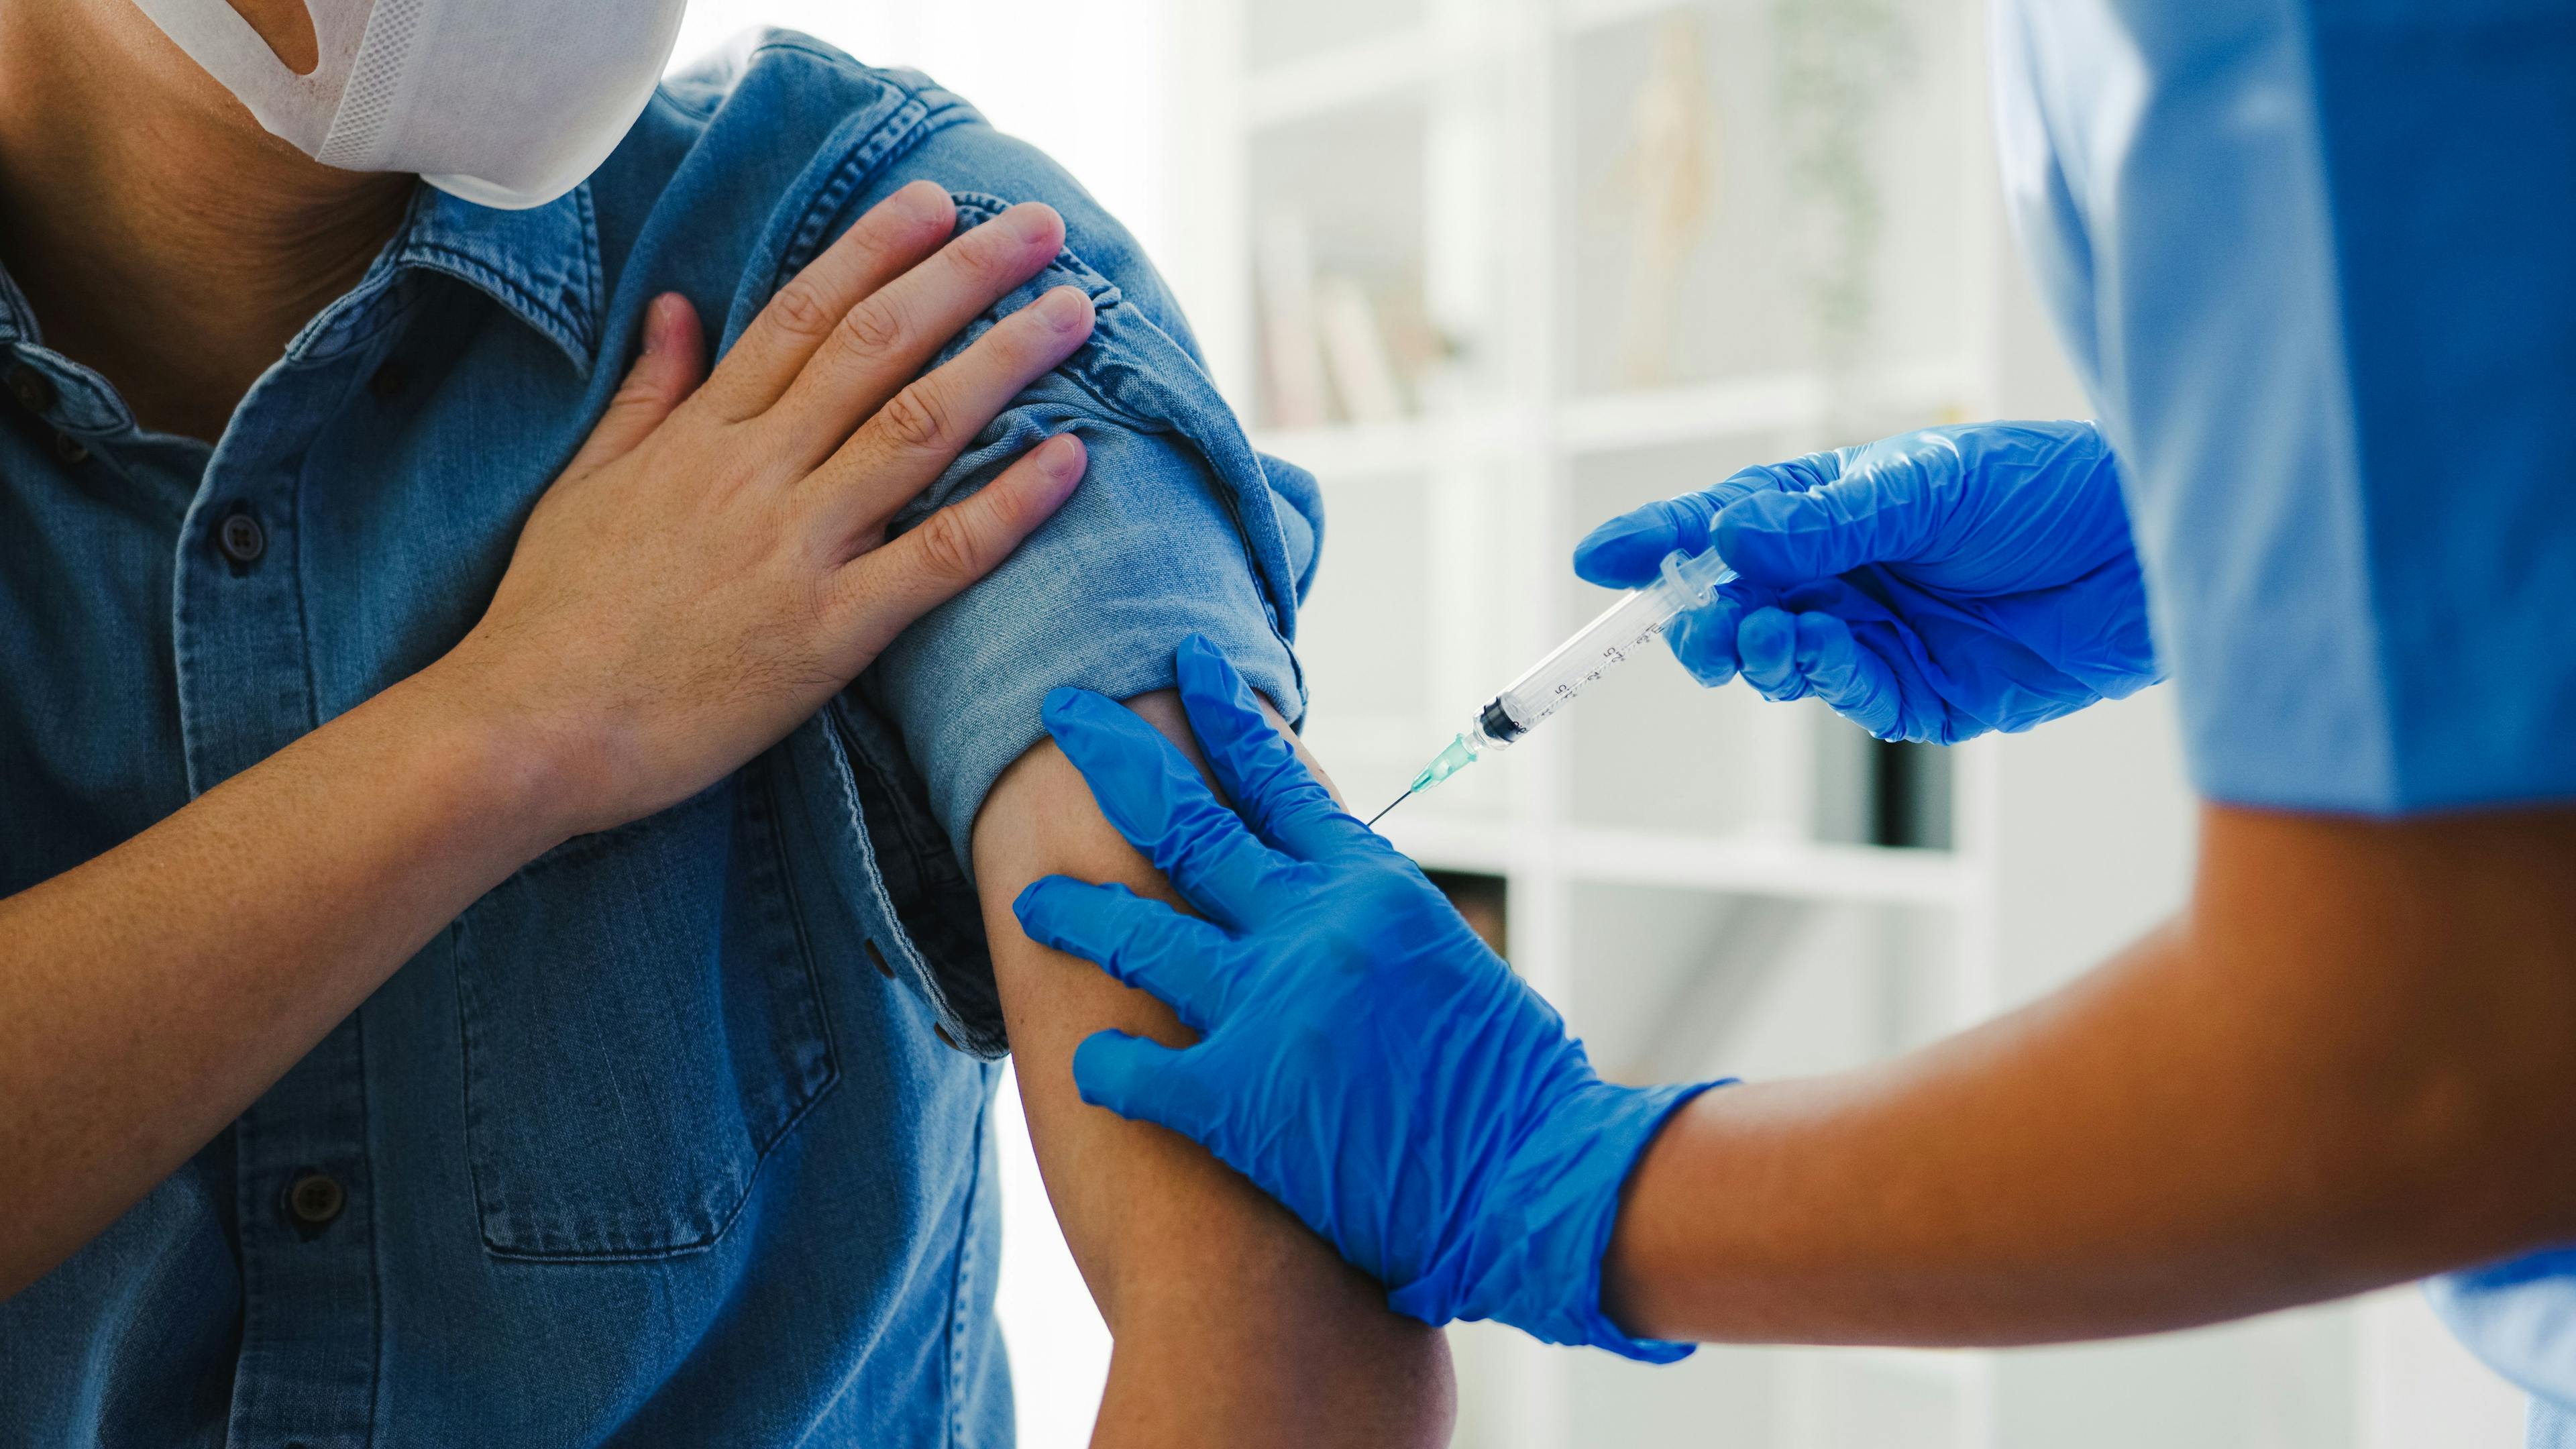 Person getting vaccinated for COVID-19 / tirachard - stock.adobe.com